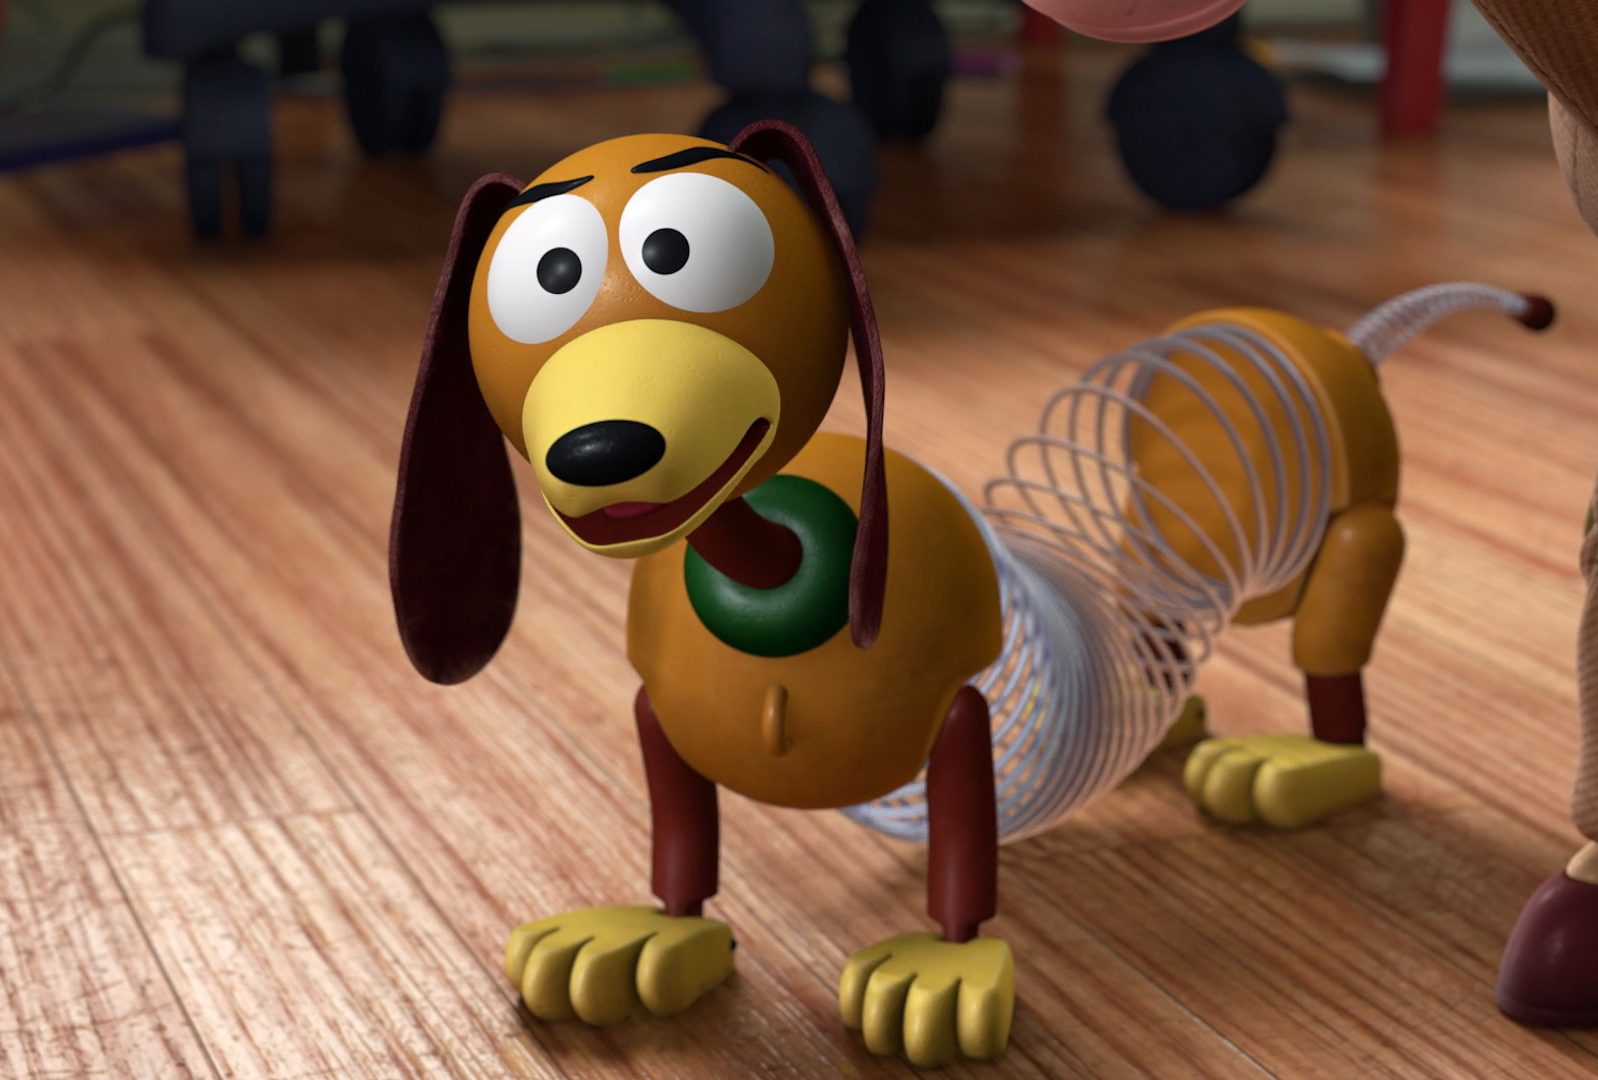 Do You Know the Names of These Toys from Toy Story? Quiz slinky